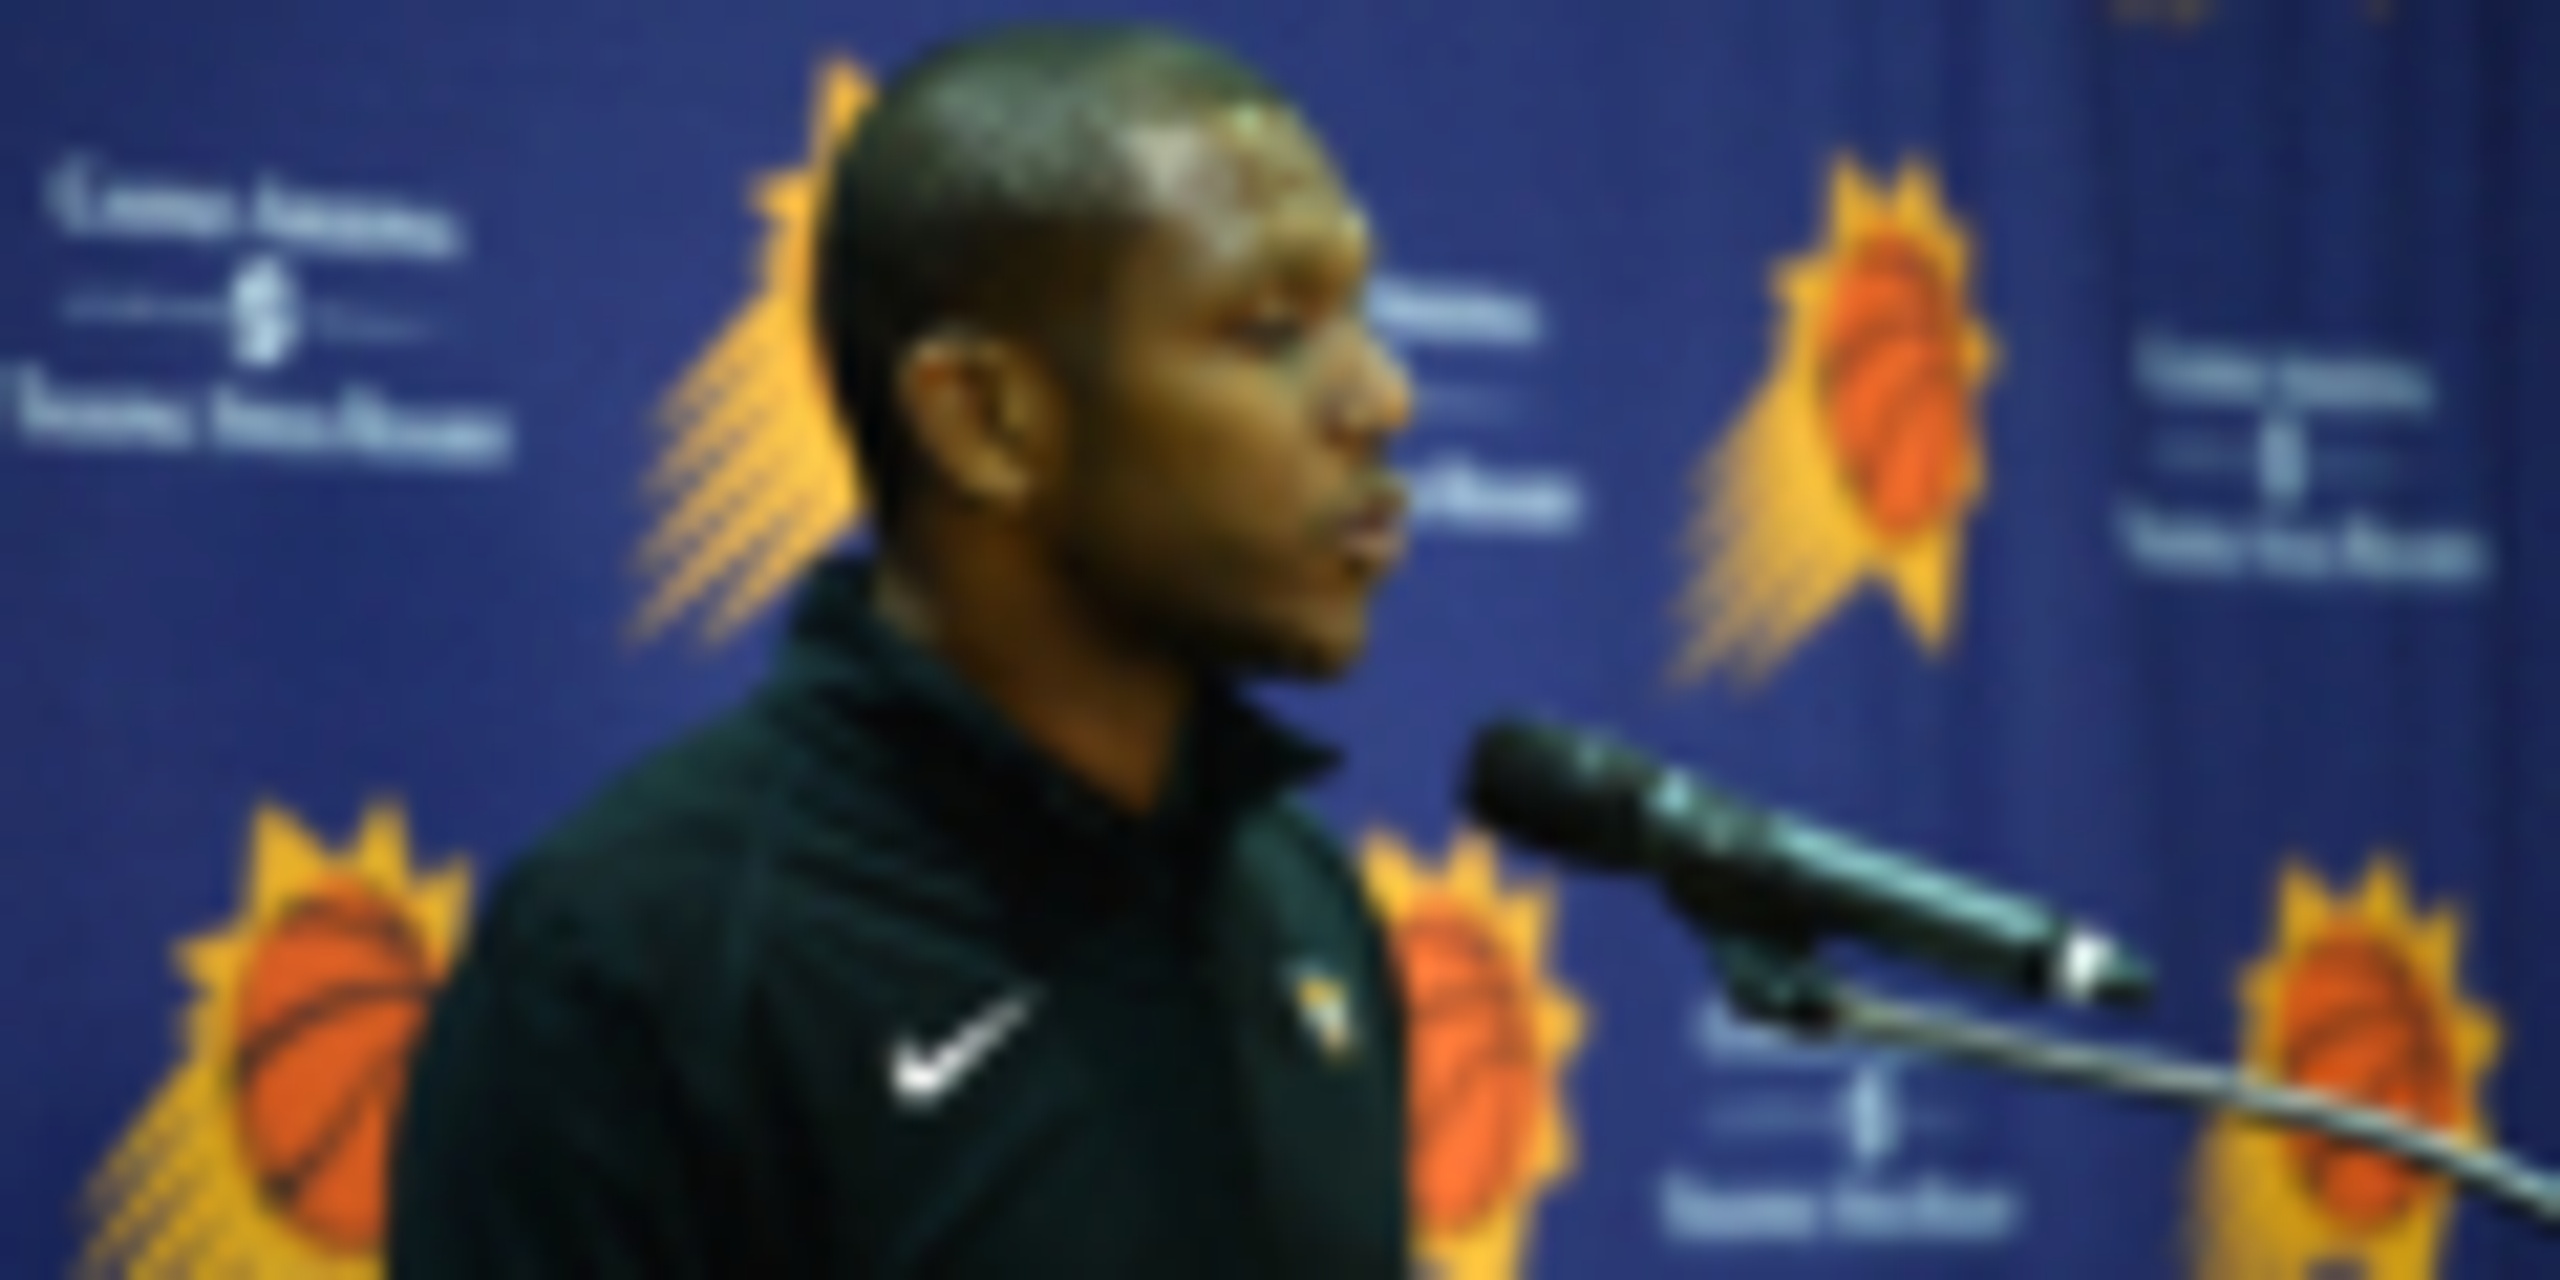 Suns promote James Jones to president of basketball operations